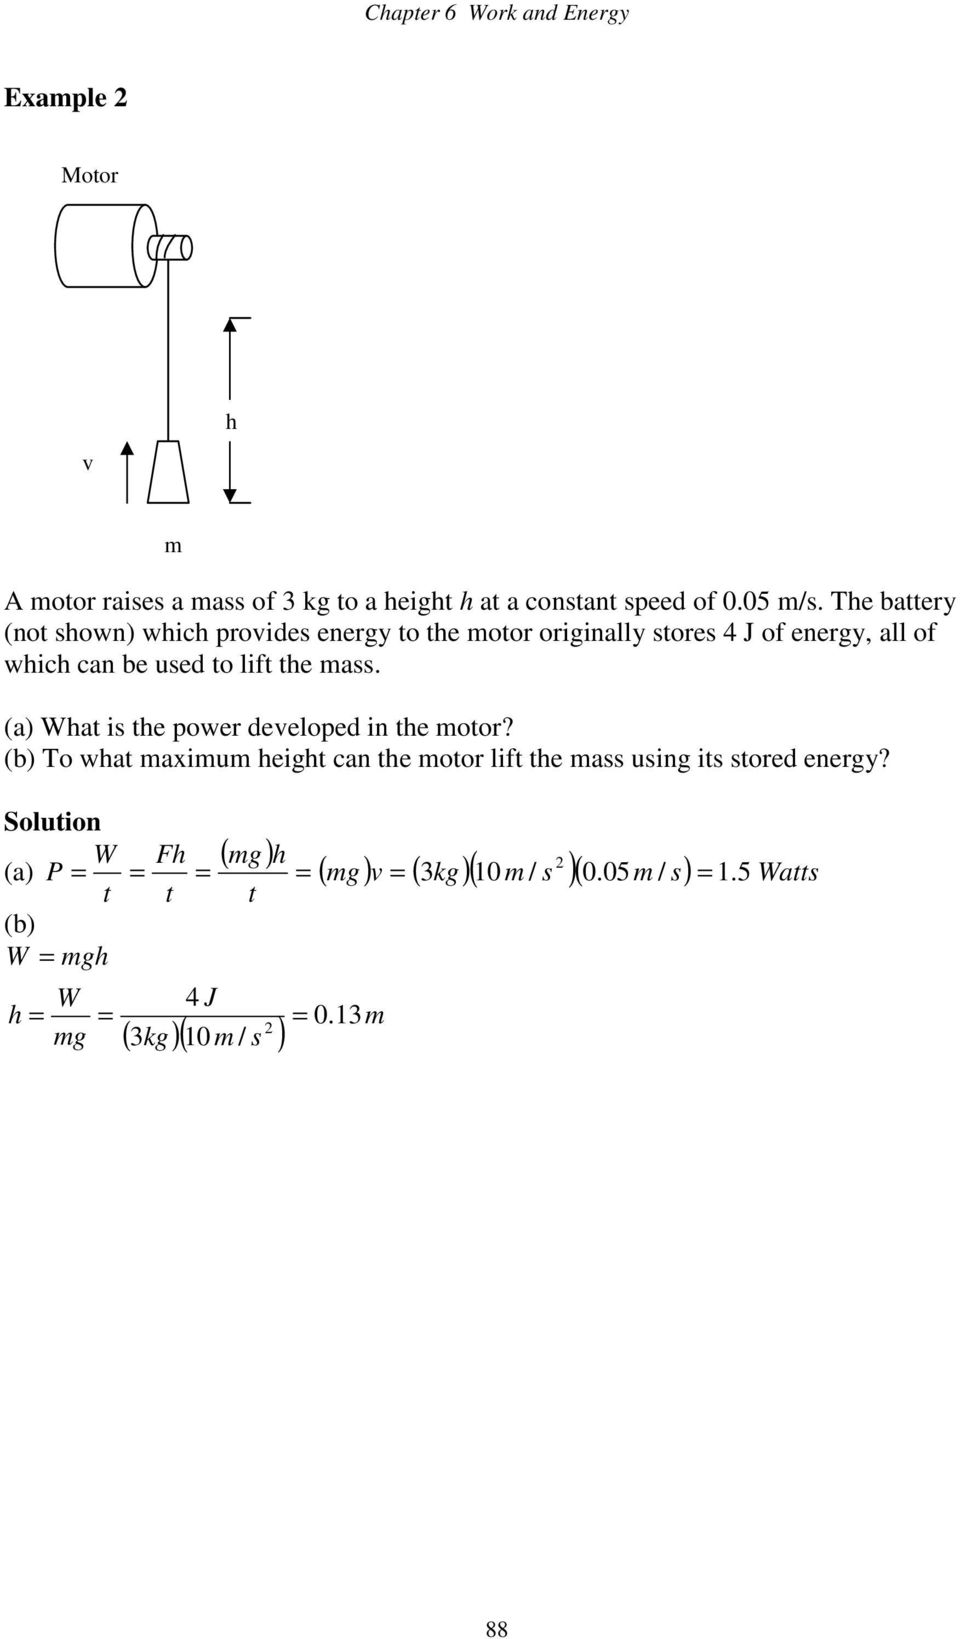 mass. (a) What is the power developed in the motor?